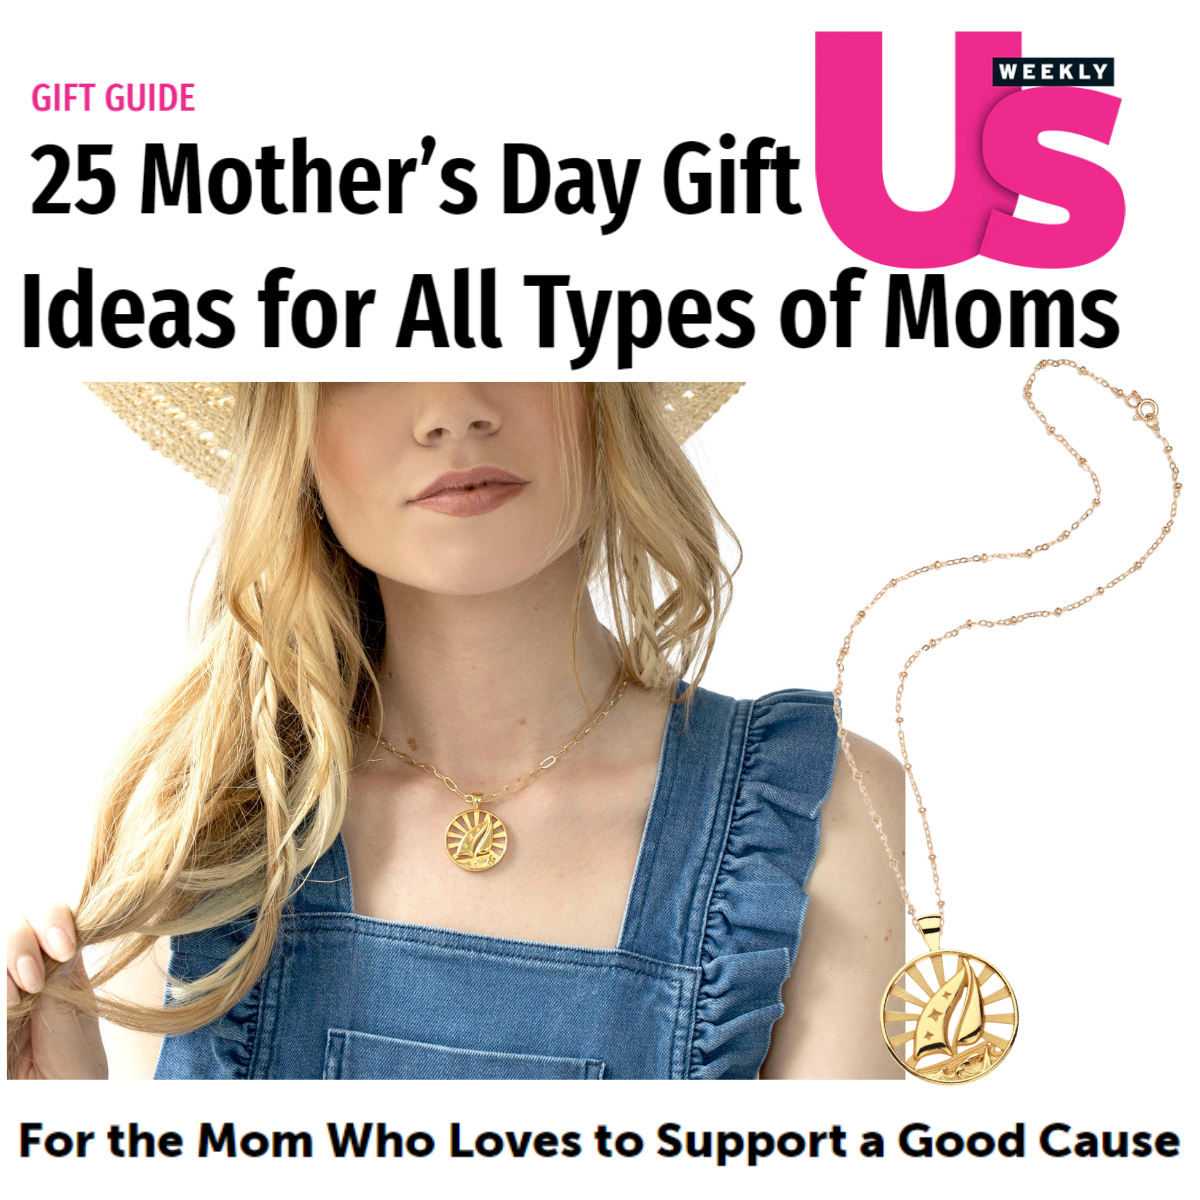 Press Highlight: Us Weekly Mother's Day Favorites for All Moms